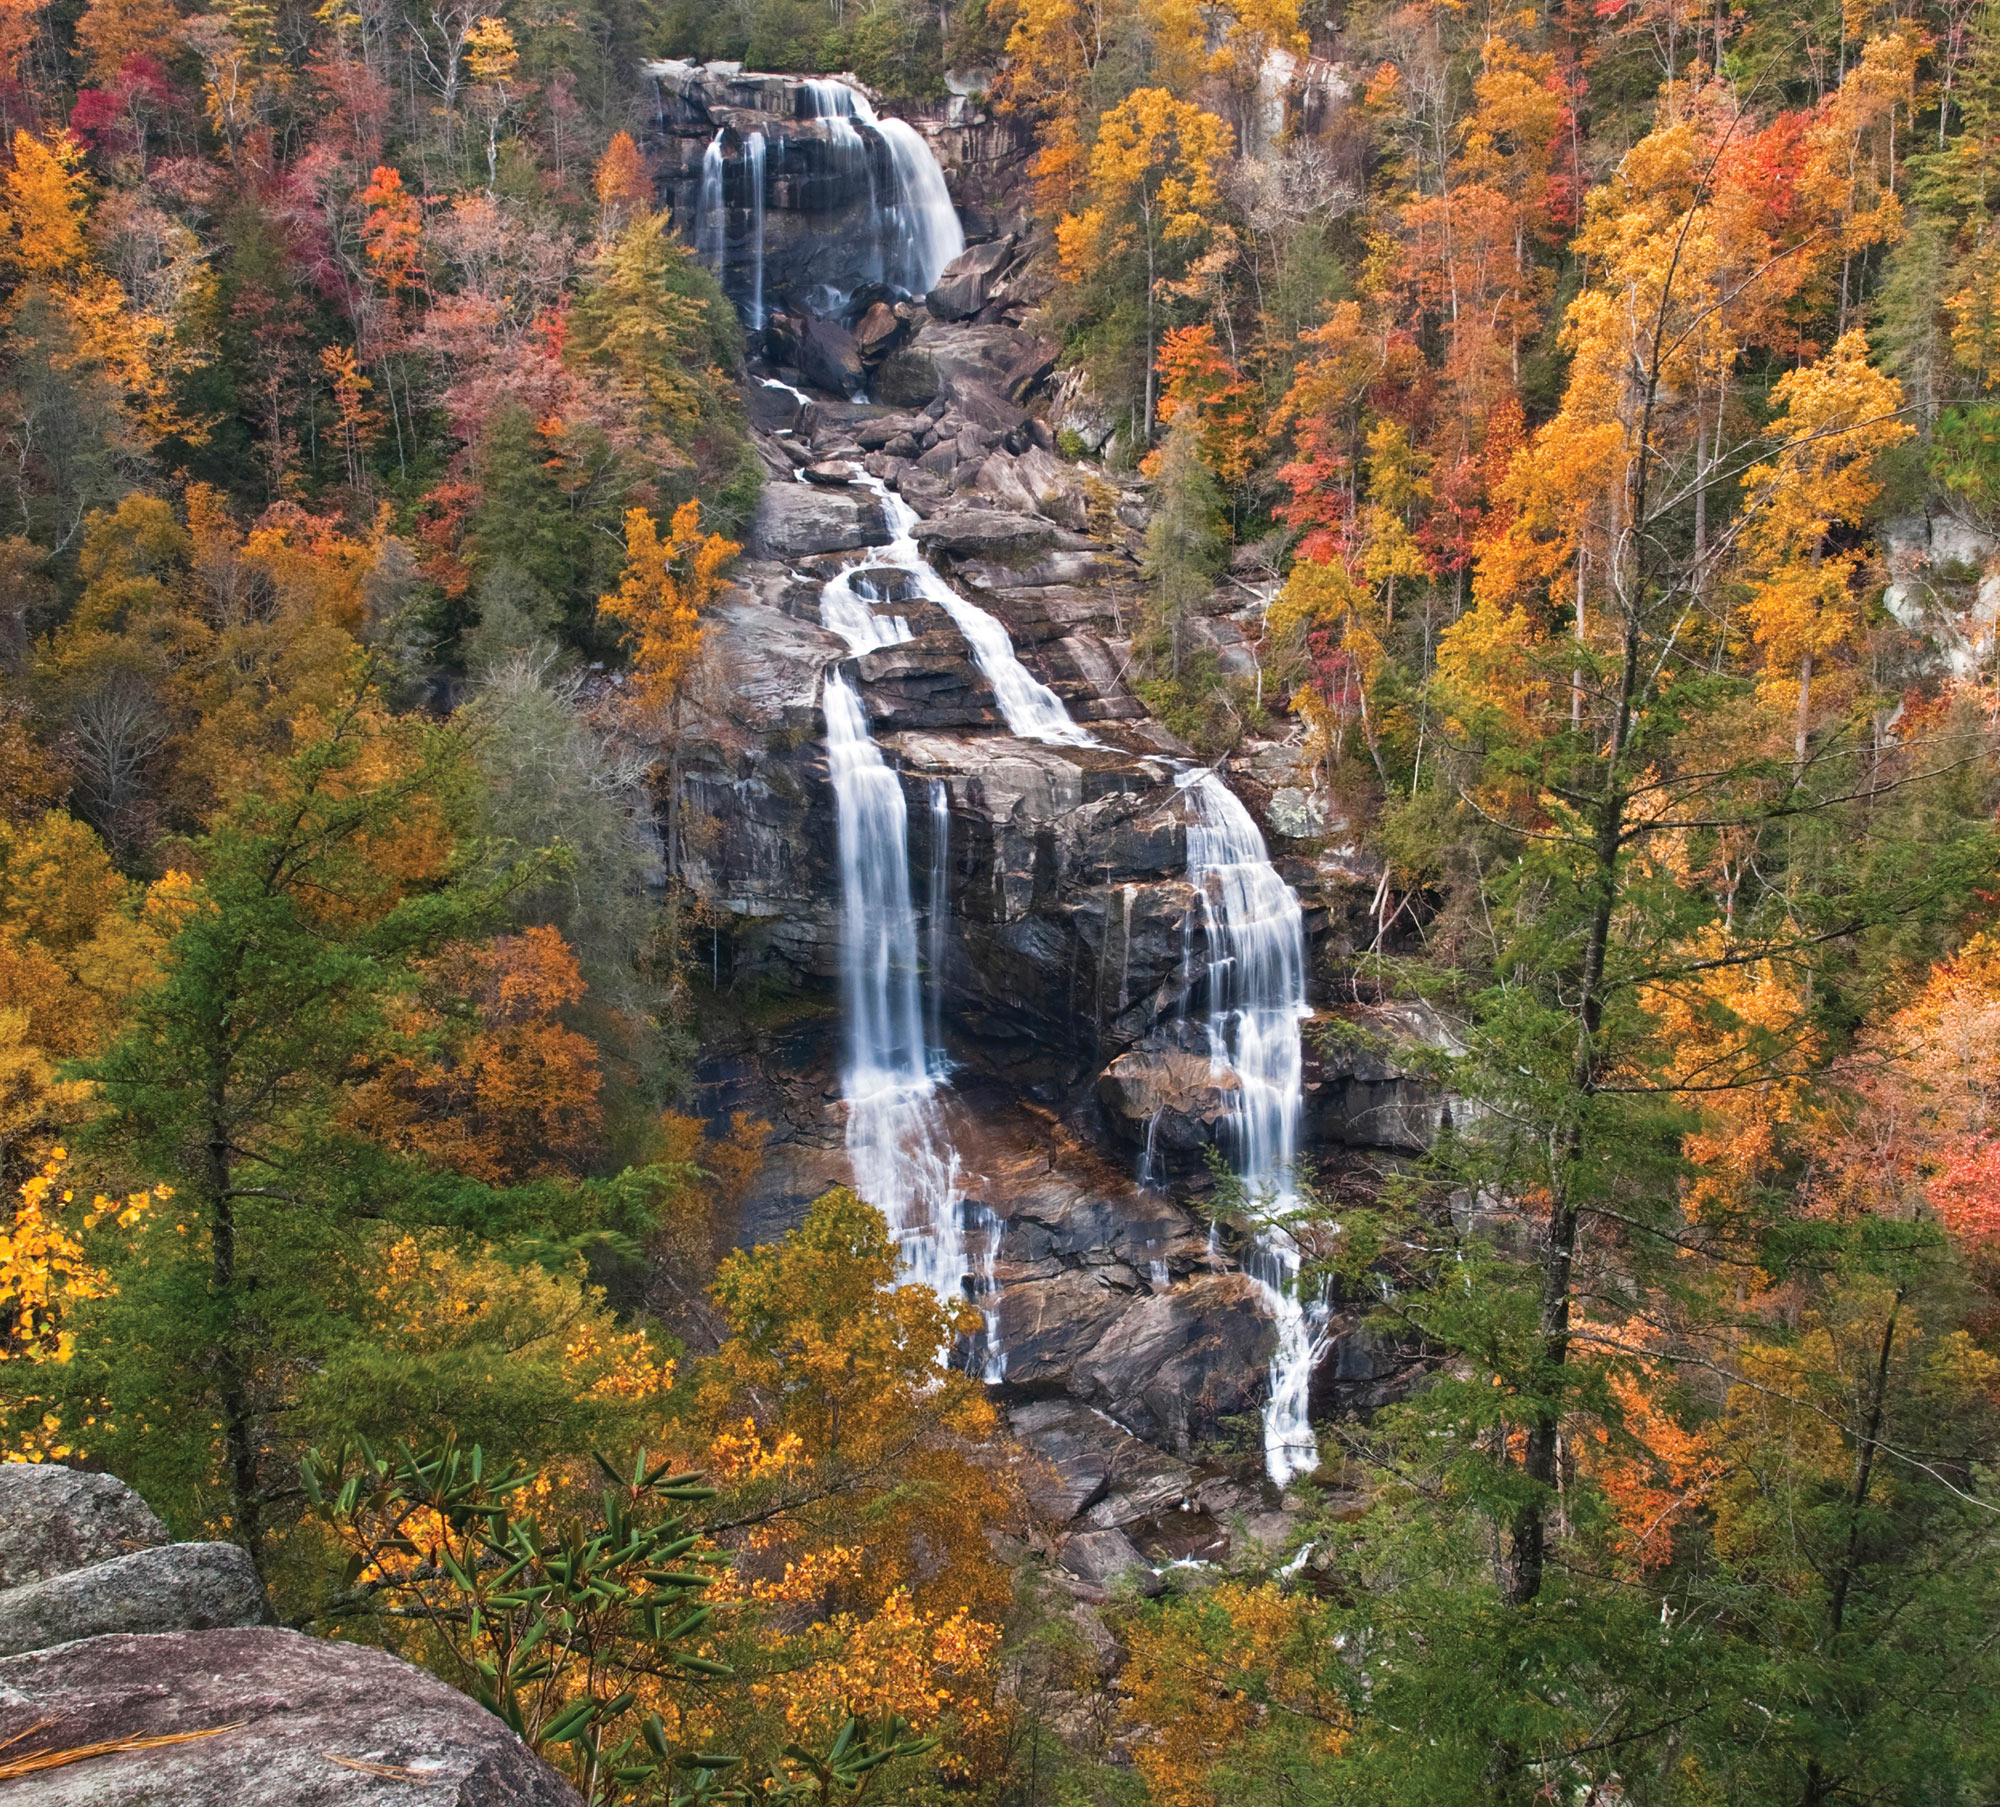 A whitewater waterfall that breaks off into two streams, falling on black rocks in between red,orange, yellow, and green autumn forests